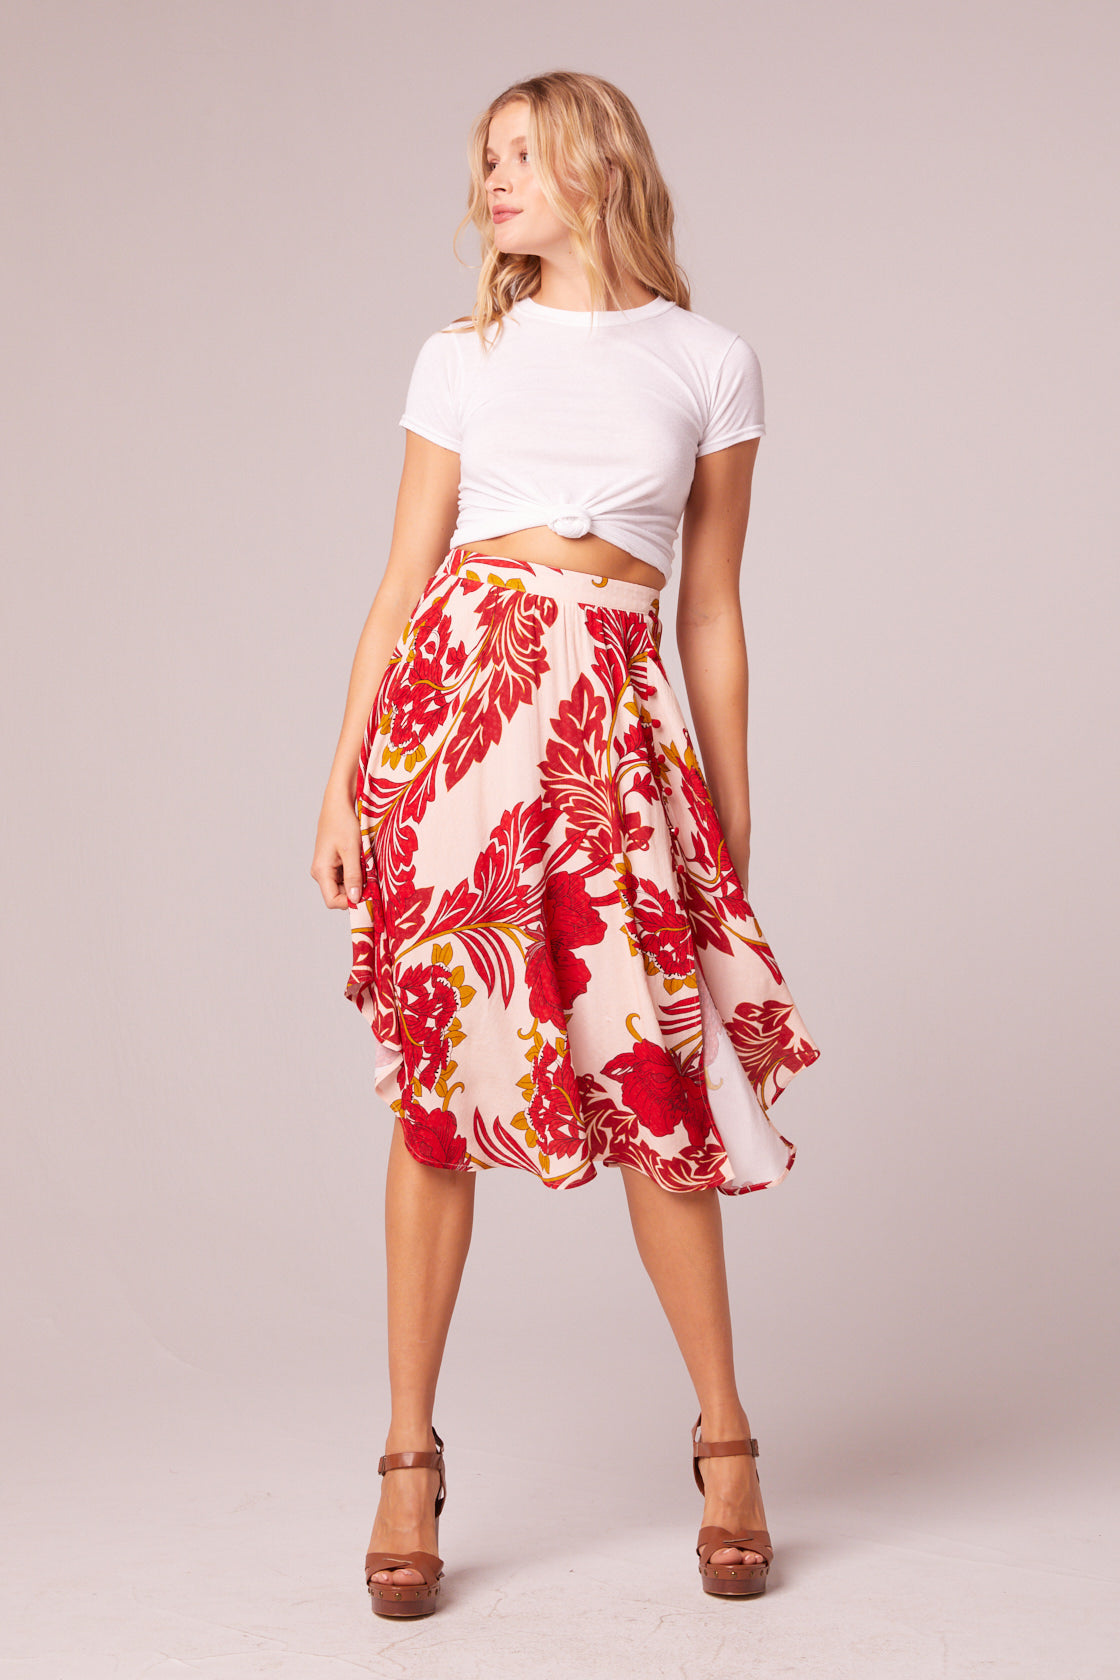 One Step Closer Red Floral Knee Length Skirt